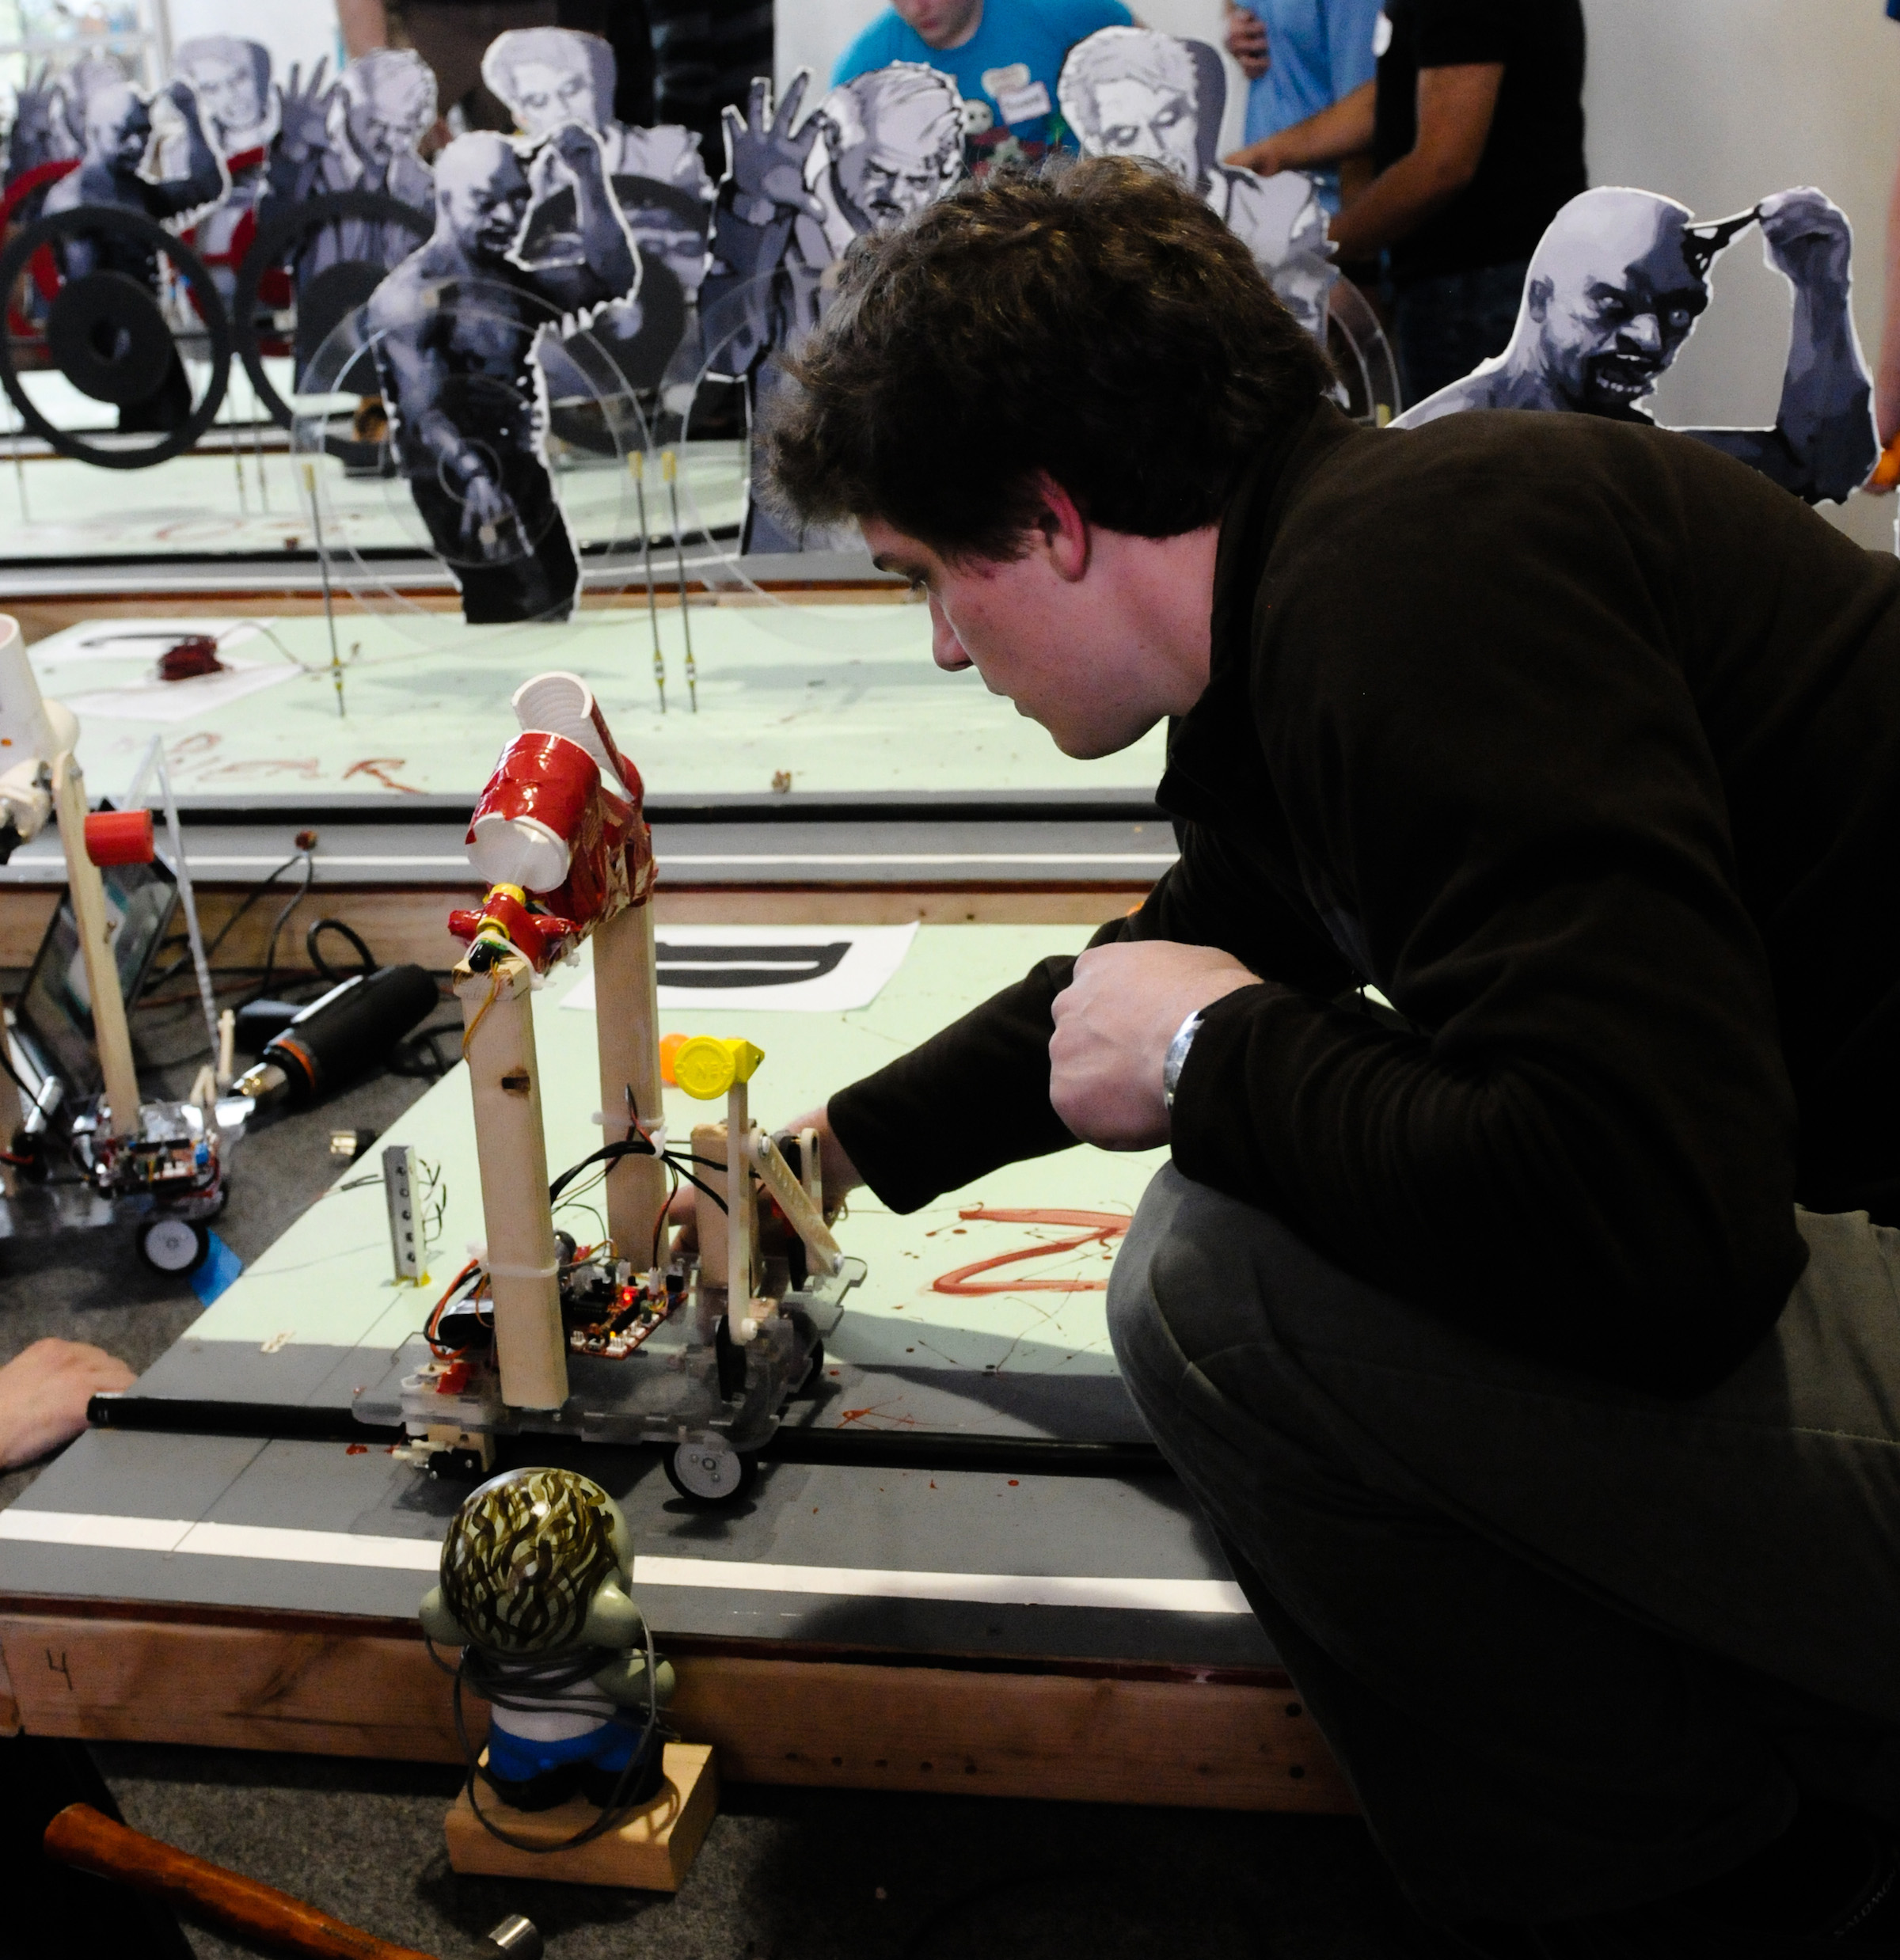 A mechanical engineering student prepares his robot for battling “zombies” during last year’s Mechanical Engineering Design Day at the University of Utah. This year’s event is scheduled for April 16.